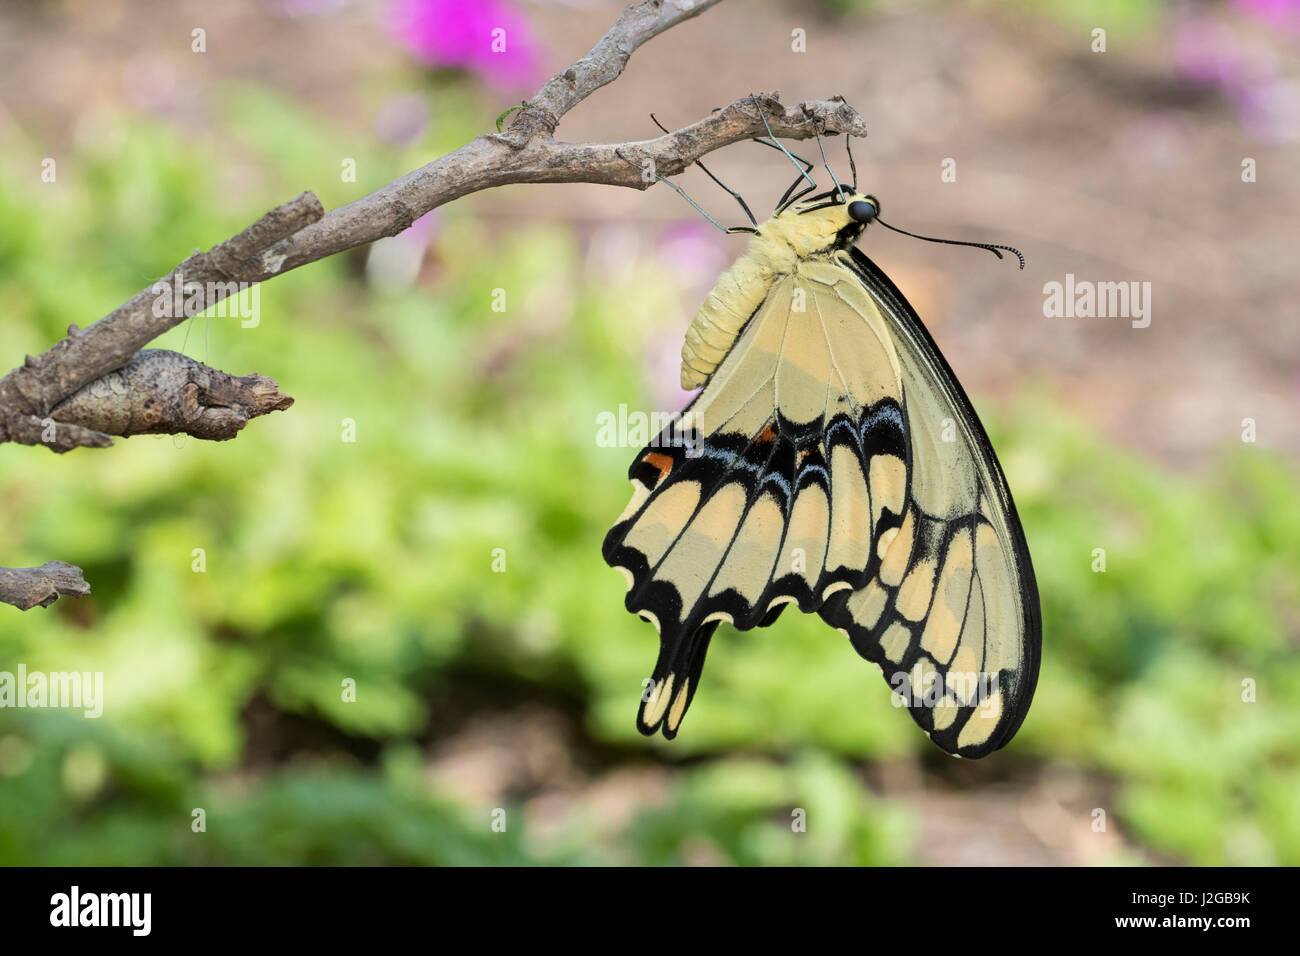 Giant Swallowtail butterfly (Papilio cresphontes) newly emerged near chrysalis, Marion County, Illinois Stock Photo